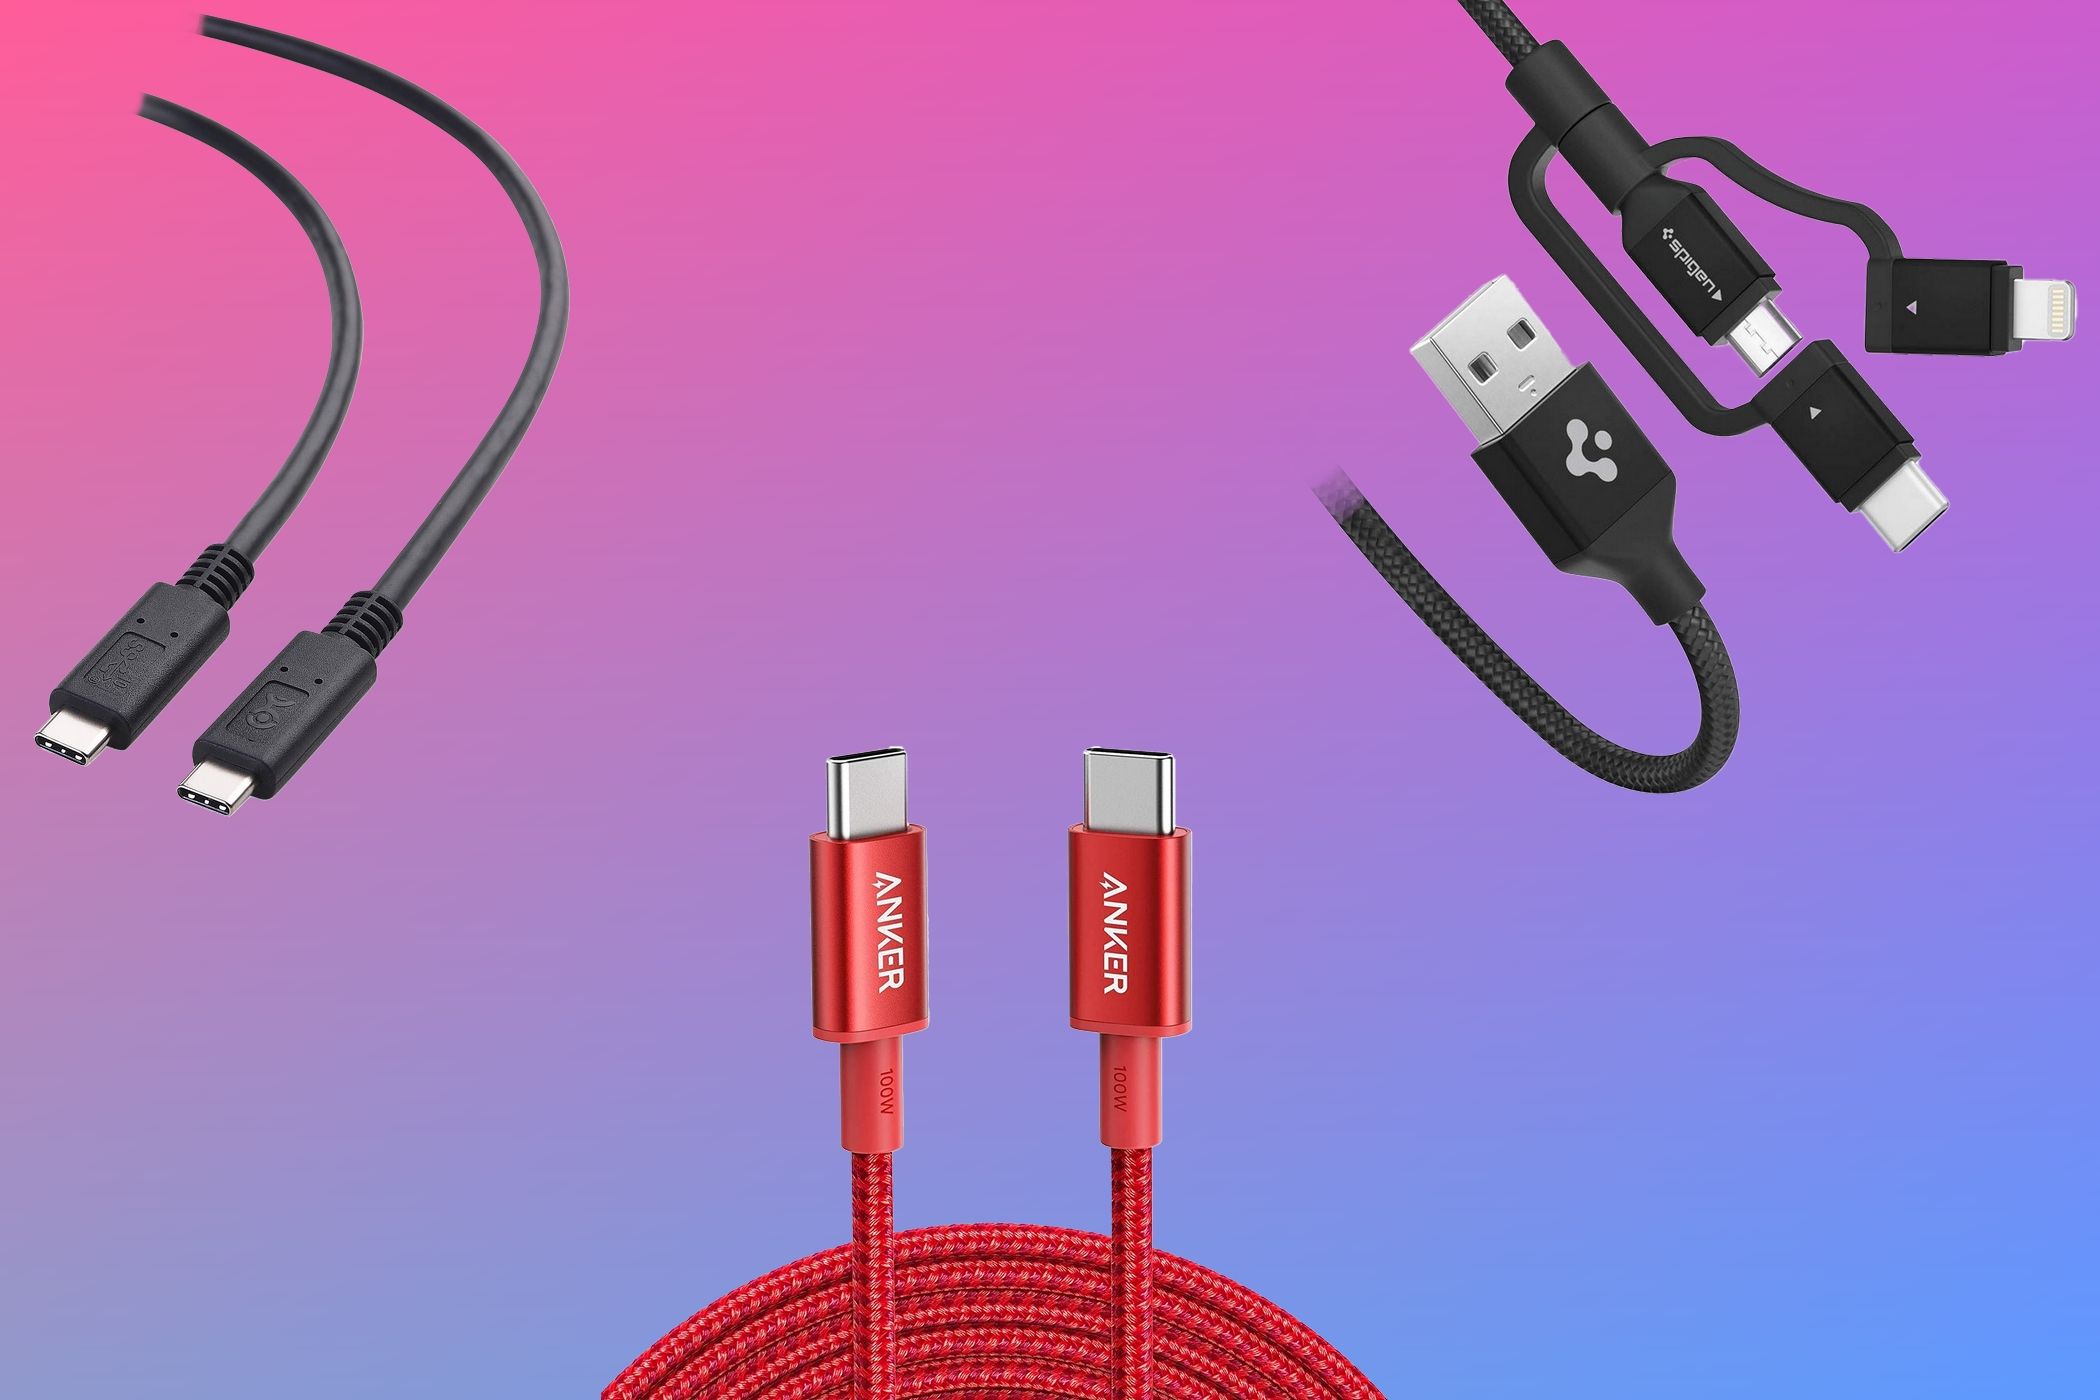 Three different USB cables on a gradient pink and blue background